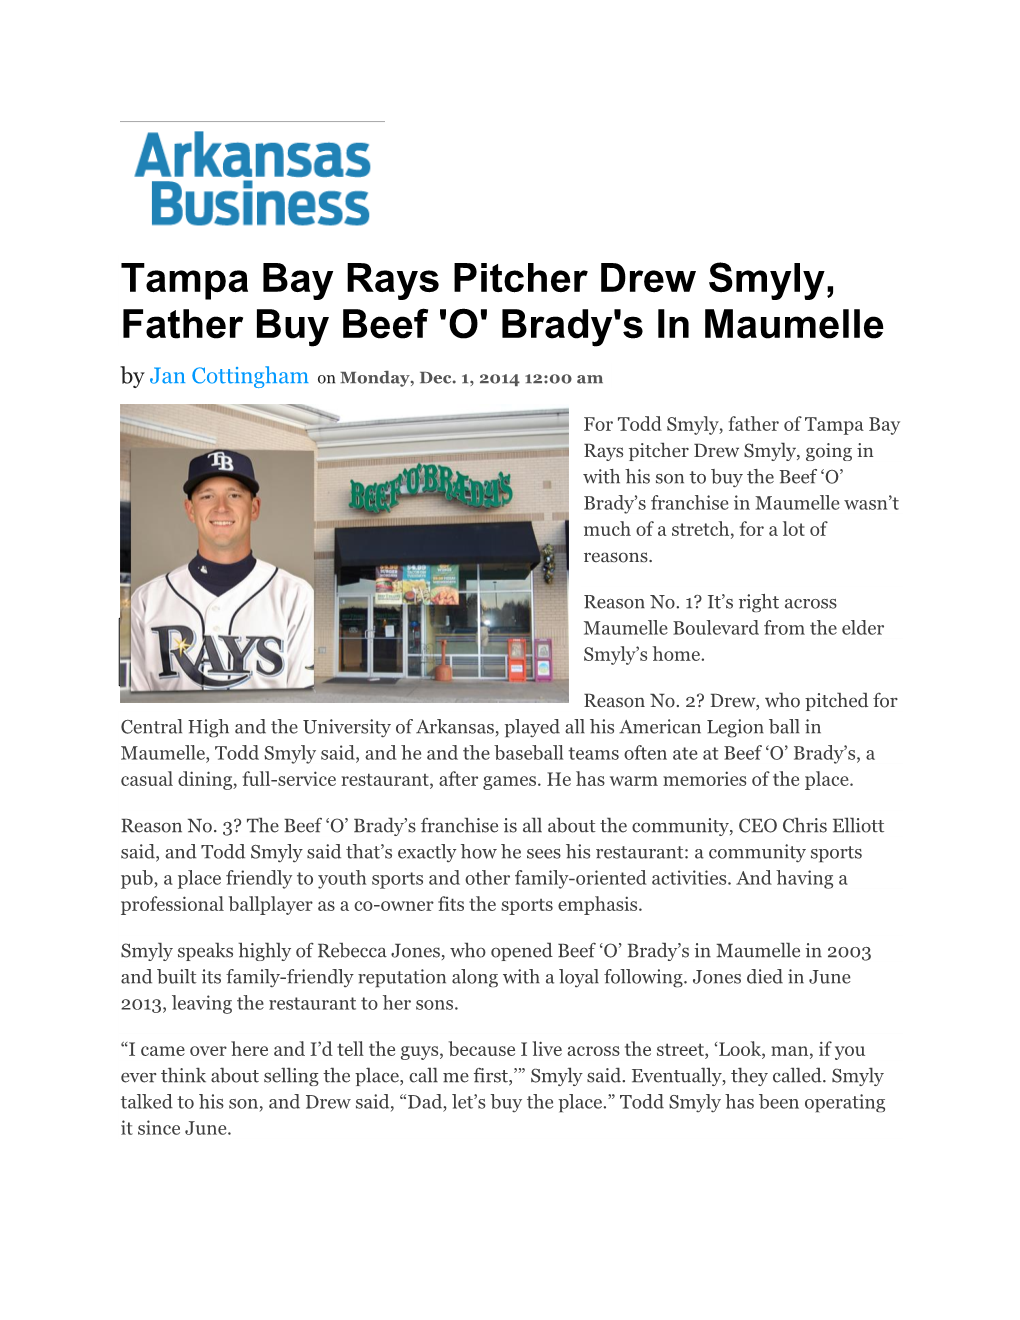 Tampa Bay Rays Pitcher Drew Smyly, Father Buy Beef 'O' Brady's in Maumelle by Jan Cottingham on Monday, Dec